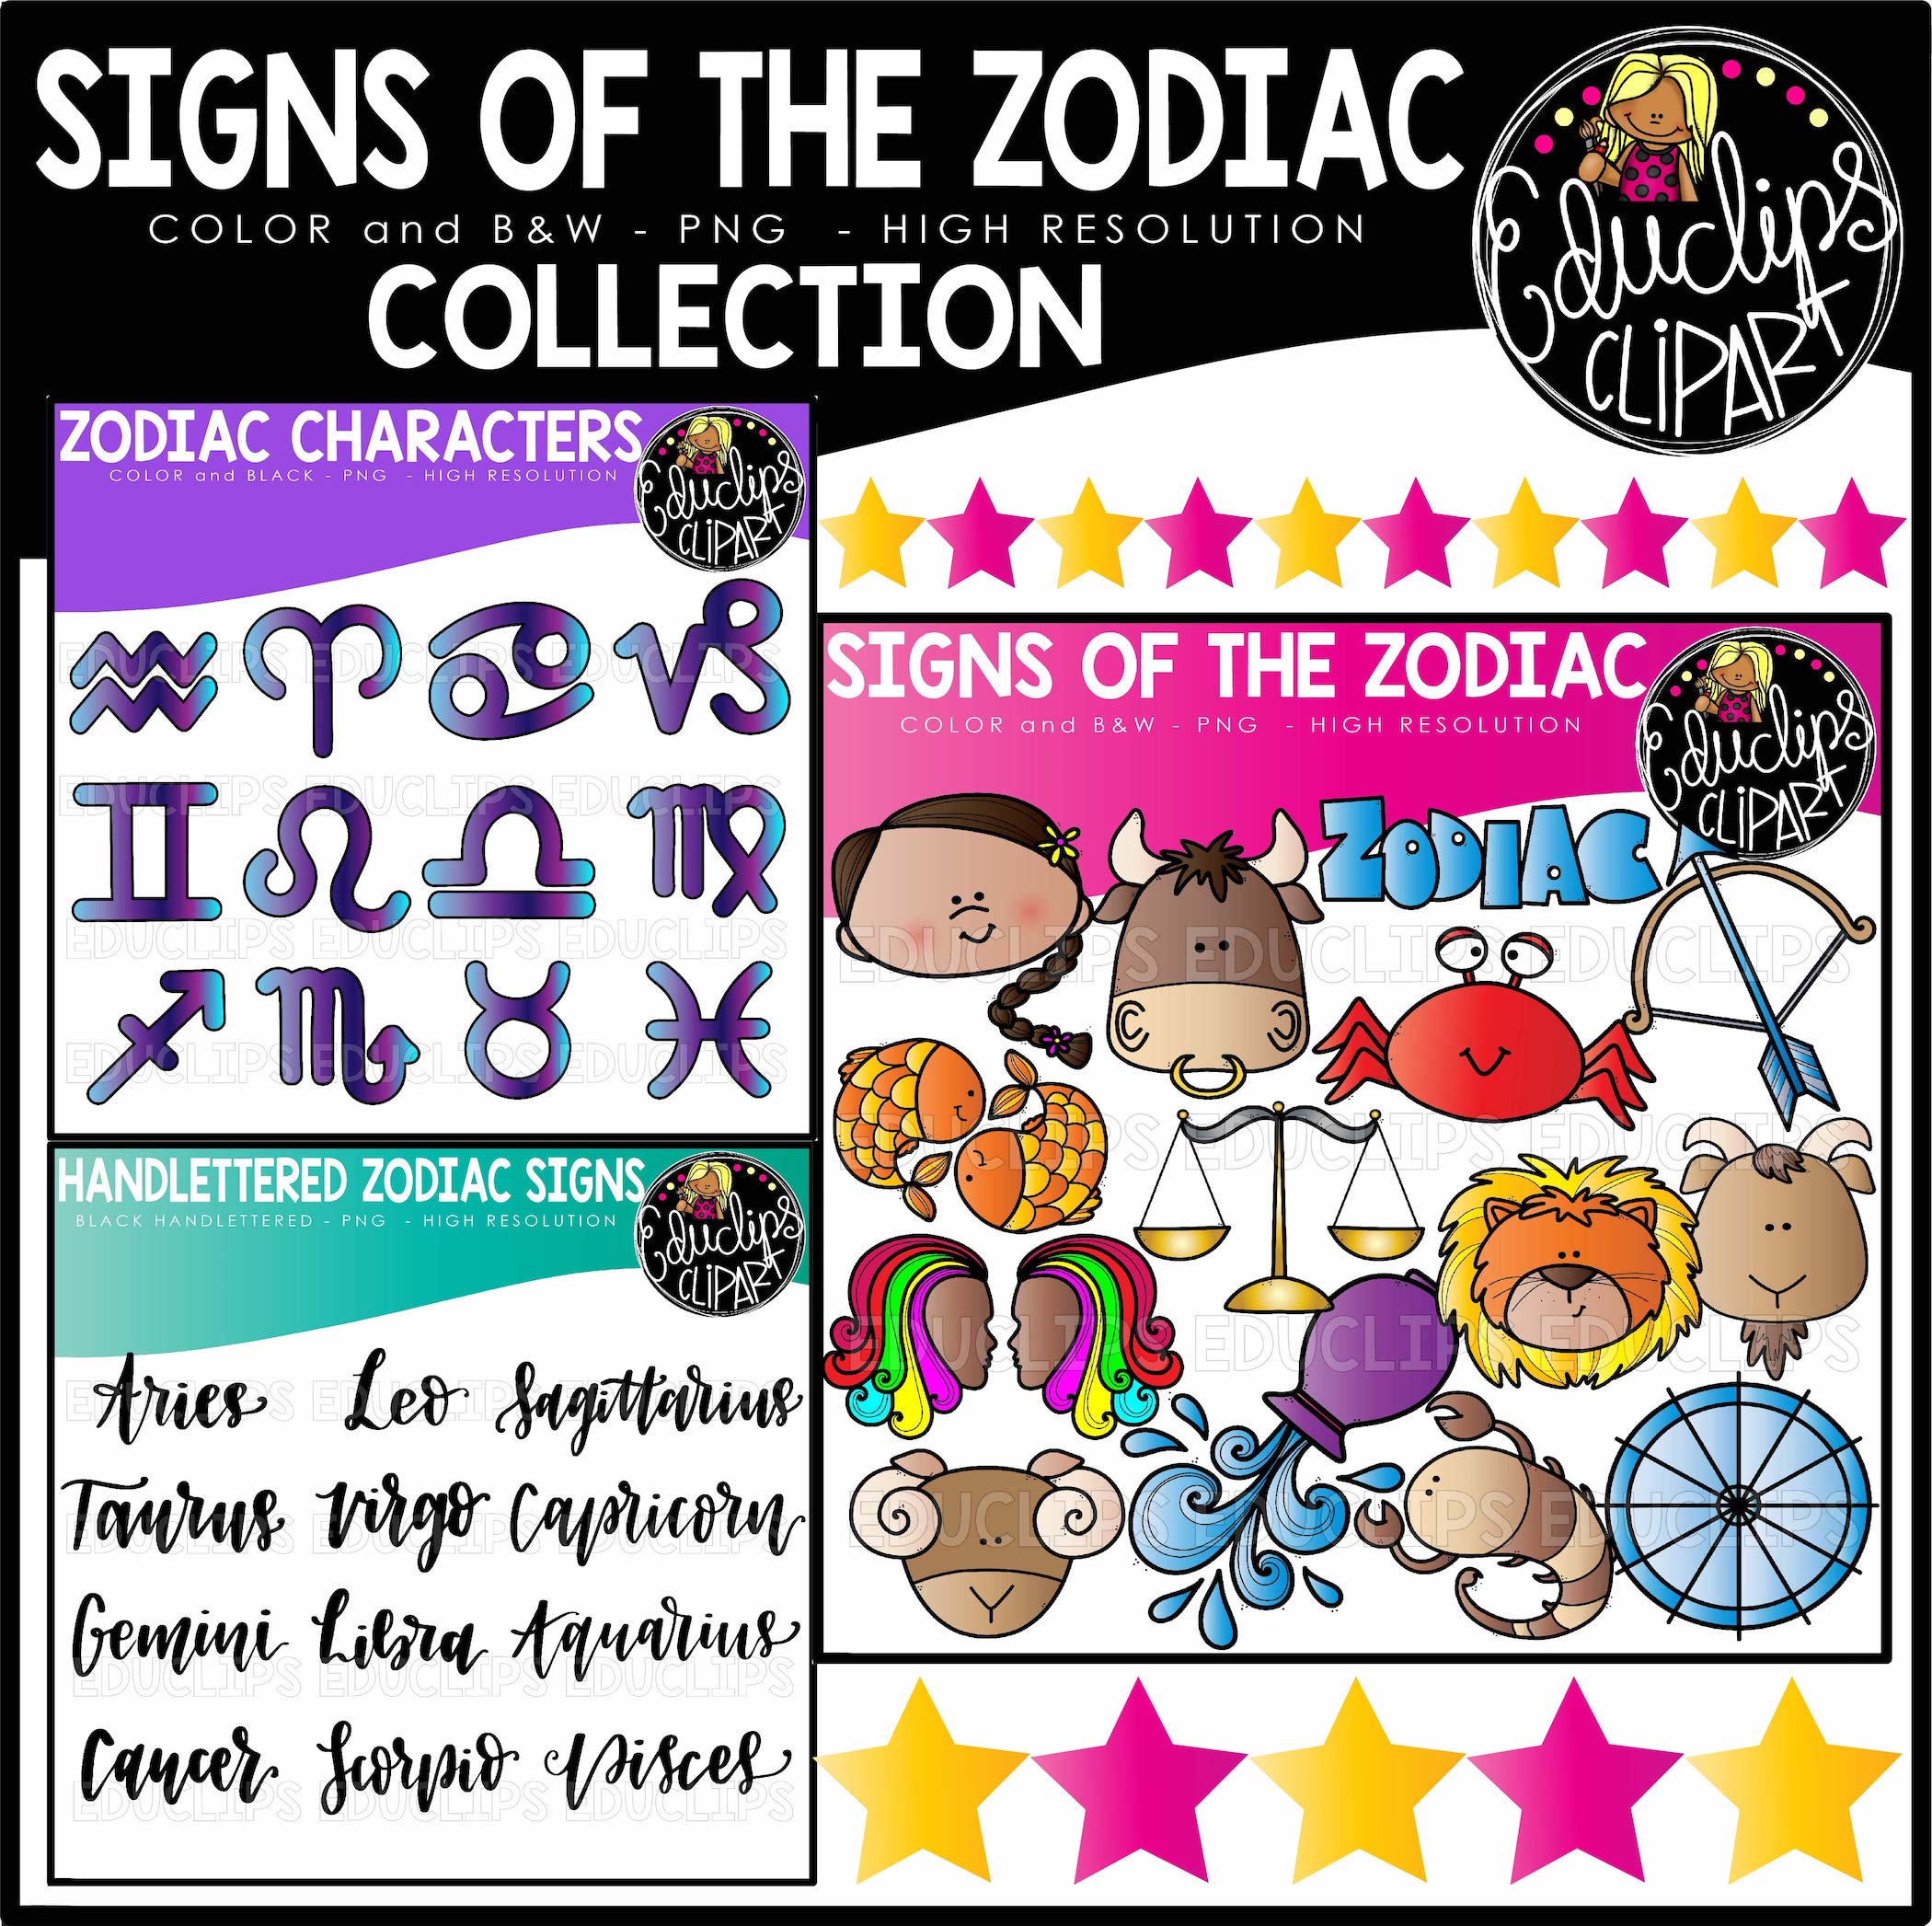 Free Clip Art Zodiac Signs free image download - Clip Art Library